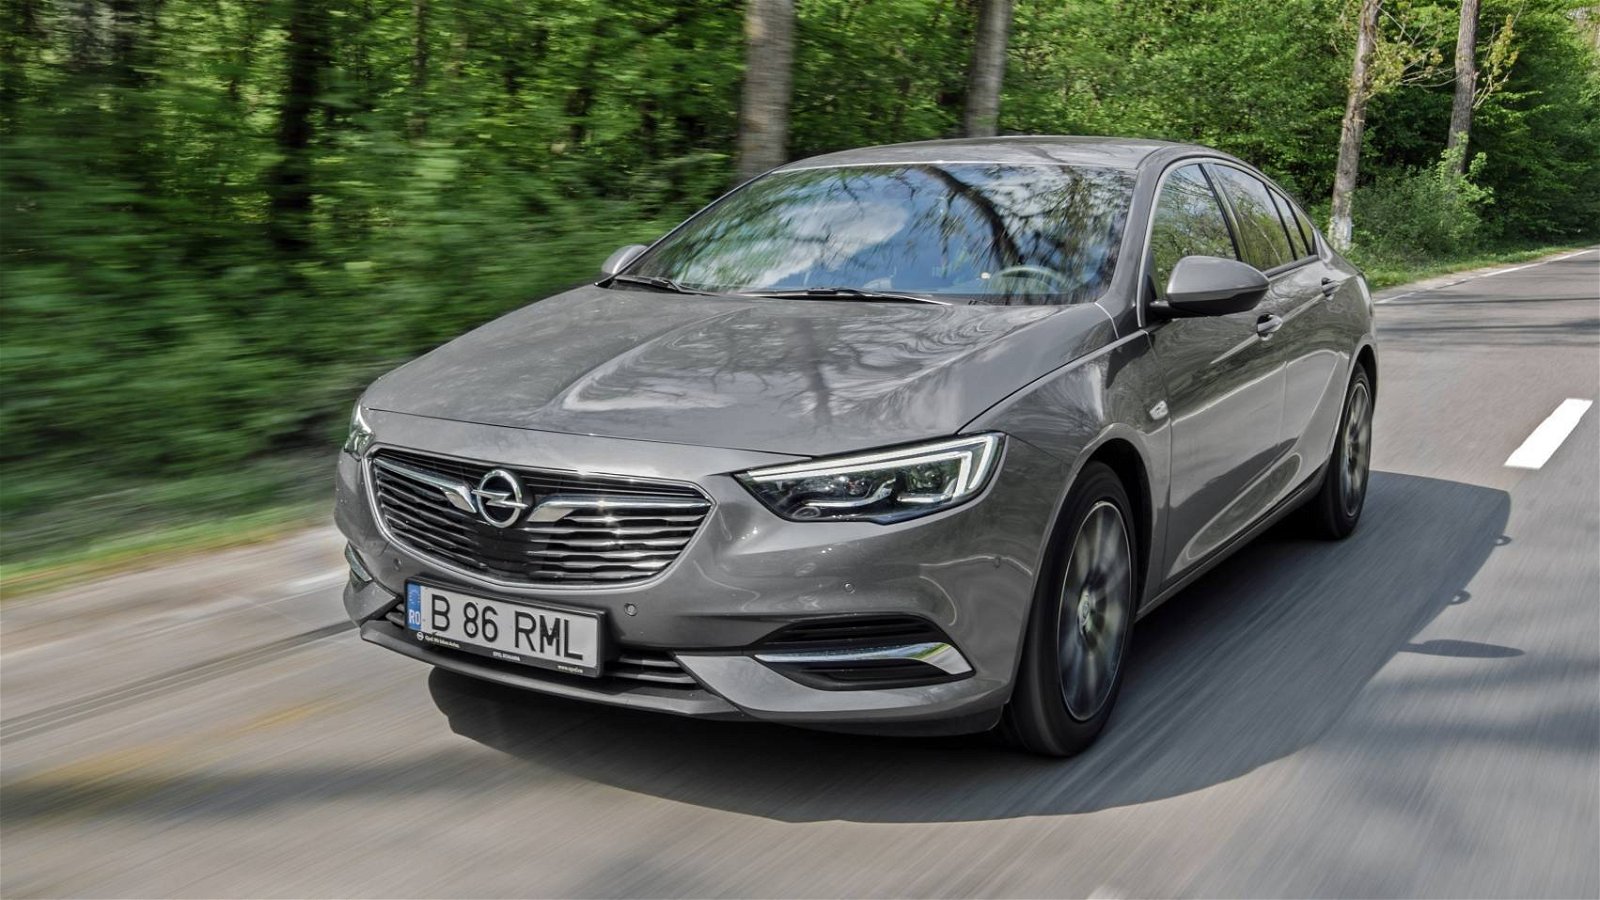 Strait thong according to bosom 2018 Opel Insignia Grand Sport 2.0 CDTI 170 AWD Dynamic review - Going  upscale without paying a premium | DriveMag Cars